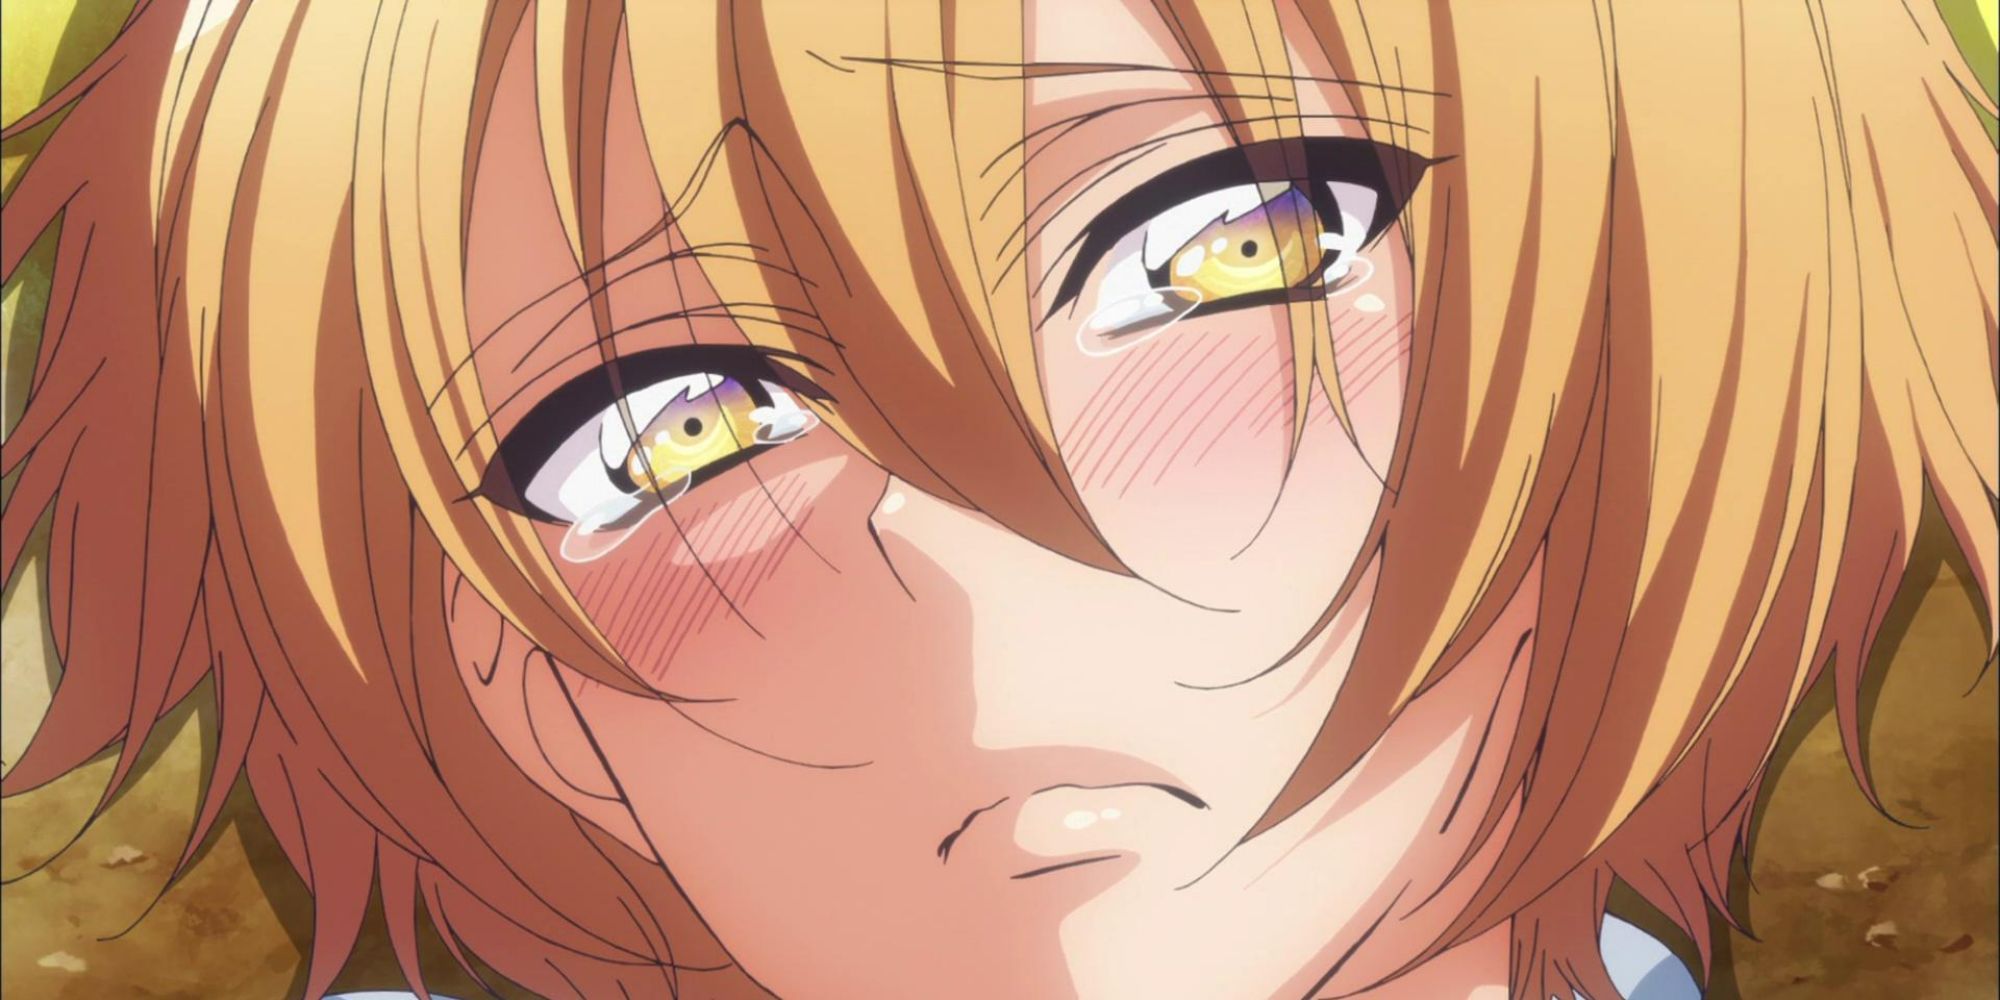 A character from Love Stage anime, crying